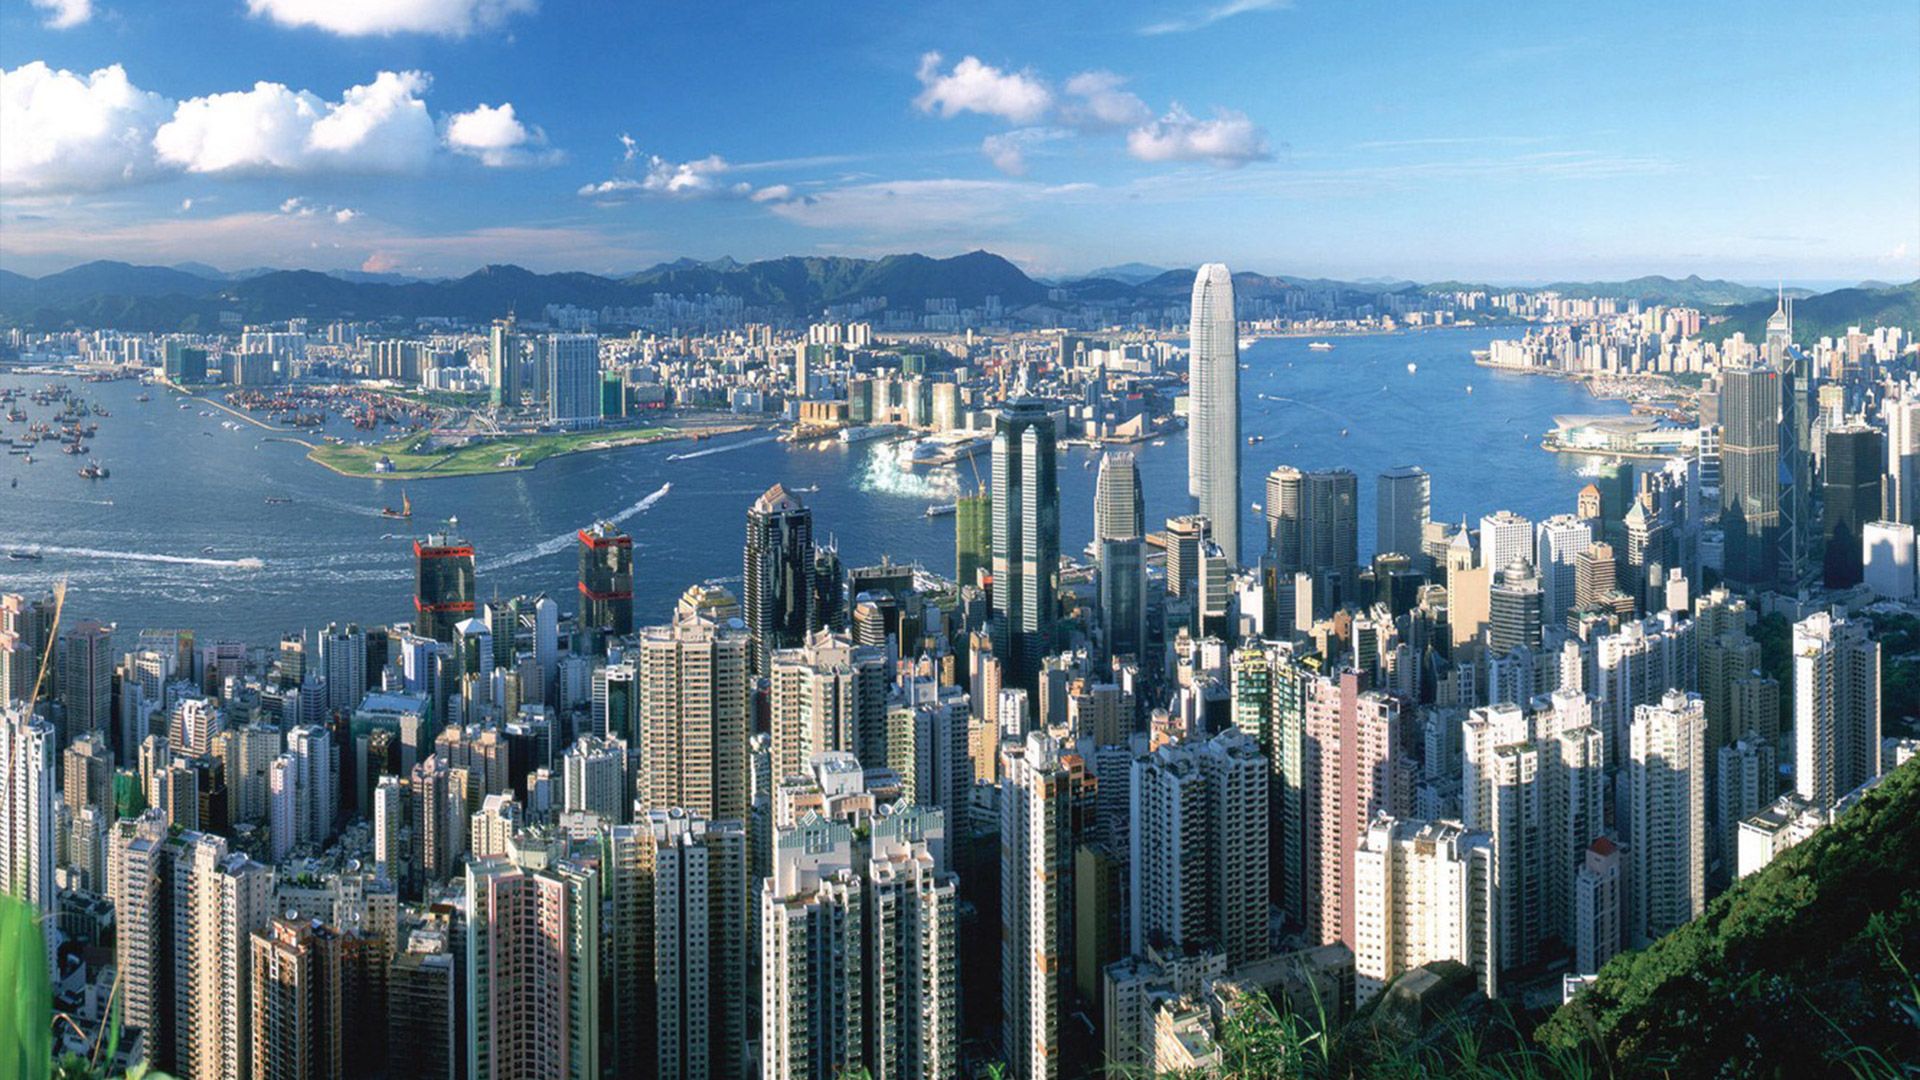 With PayPorter, you can make fast, easy and safe money transfers to Hong Kong at the most affordable prices!